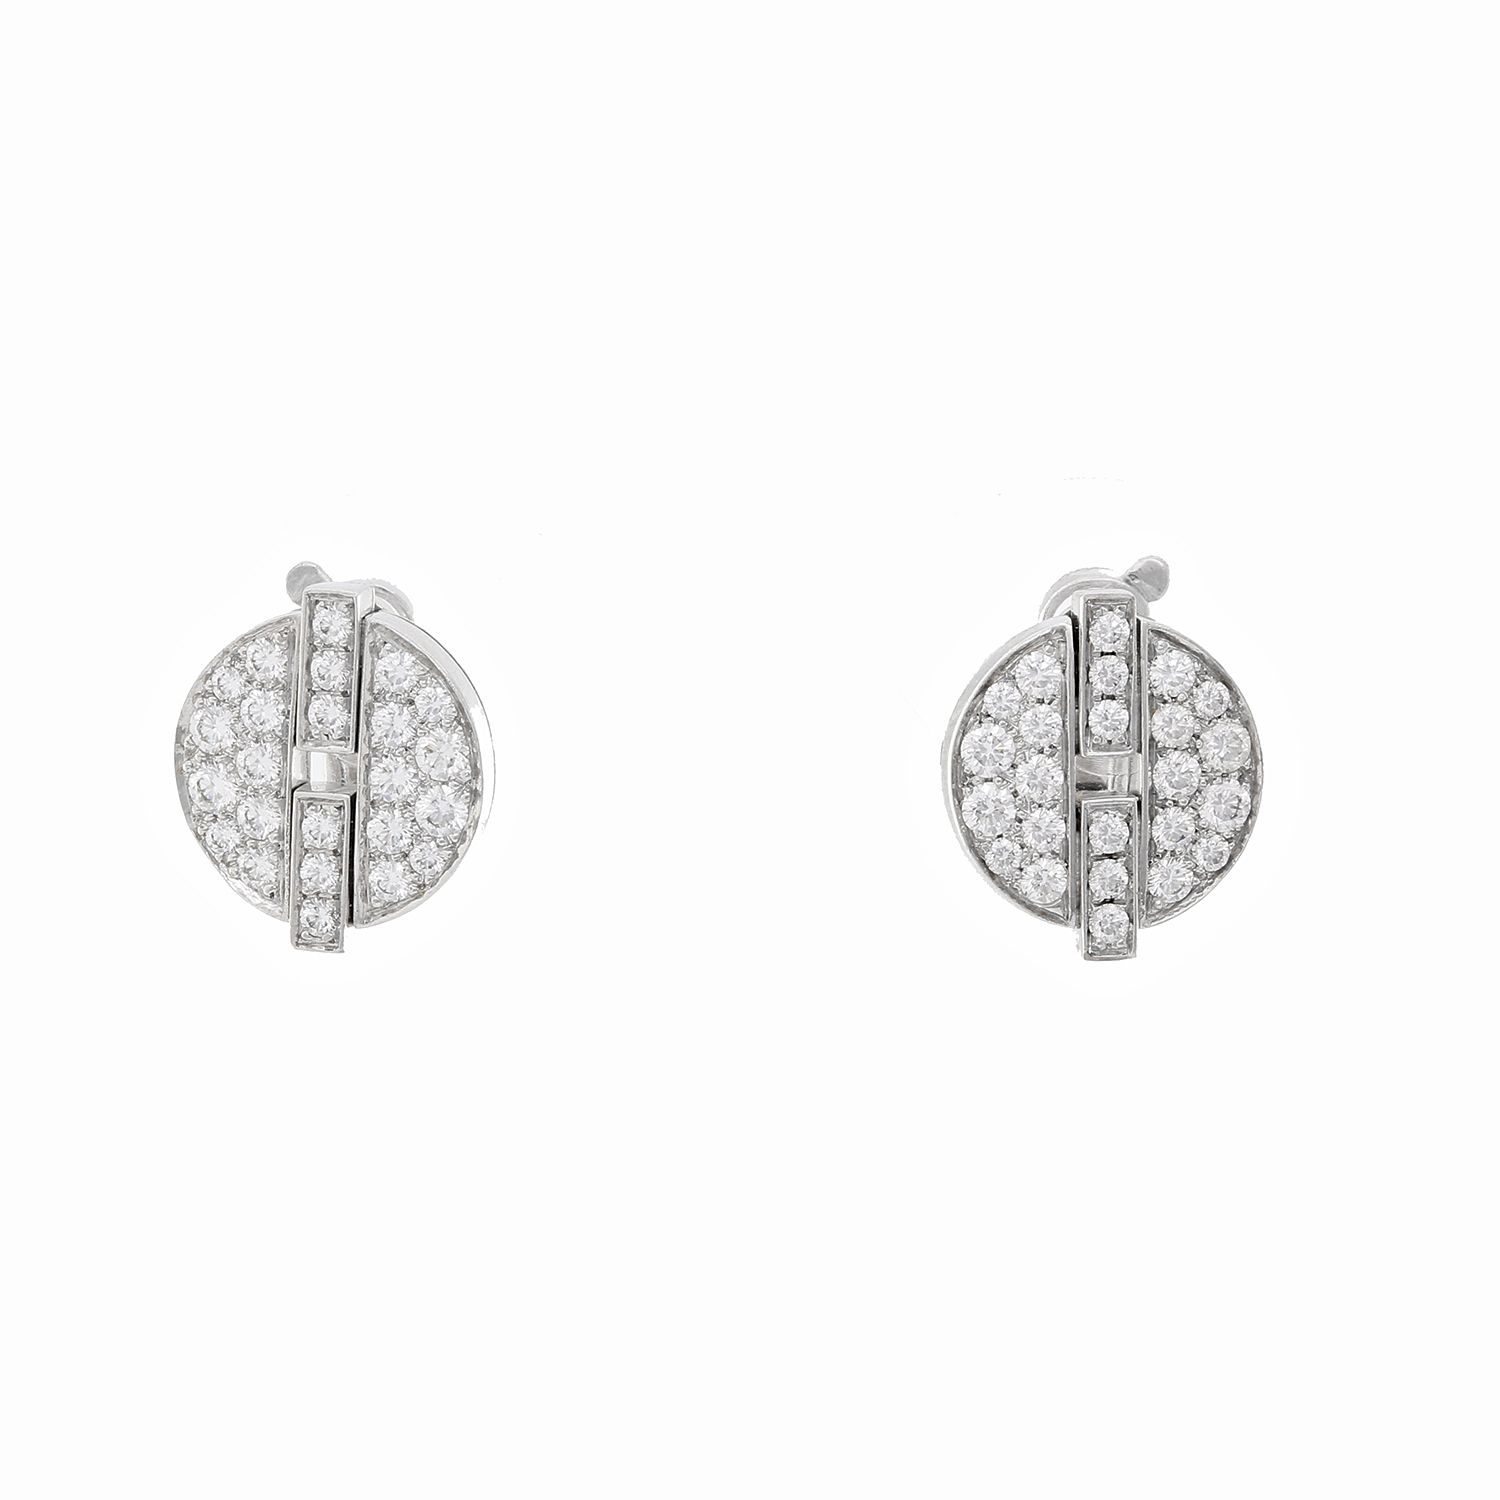 Cartier Large Himalia White Gold Earrings